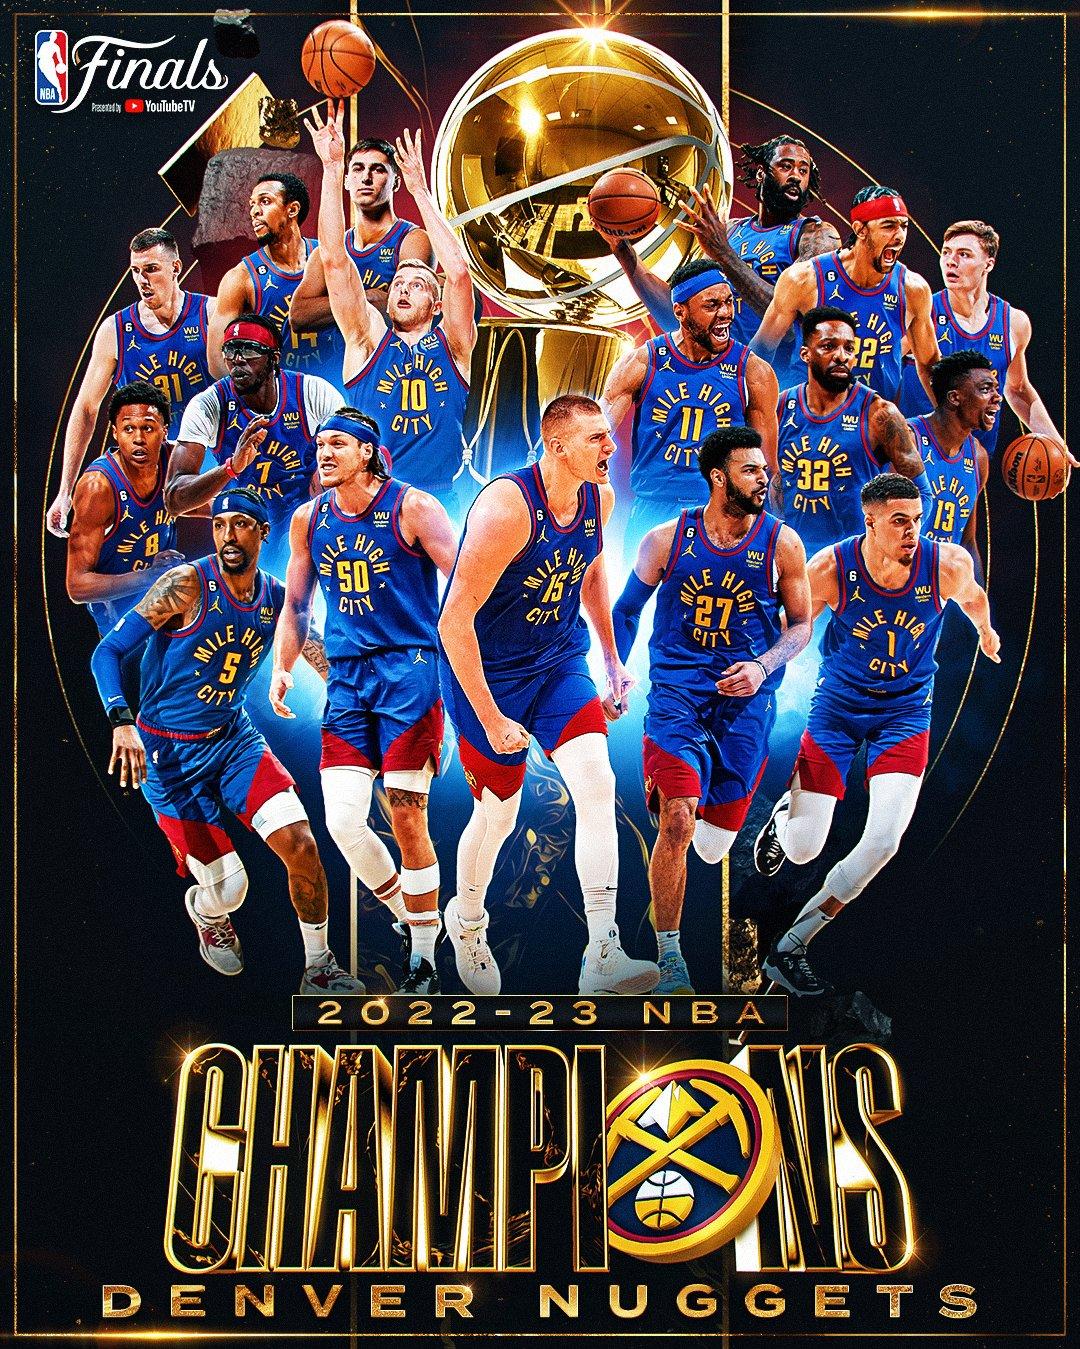 NBA on The nuggets are the NBA Champions https